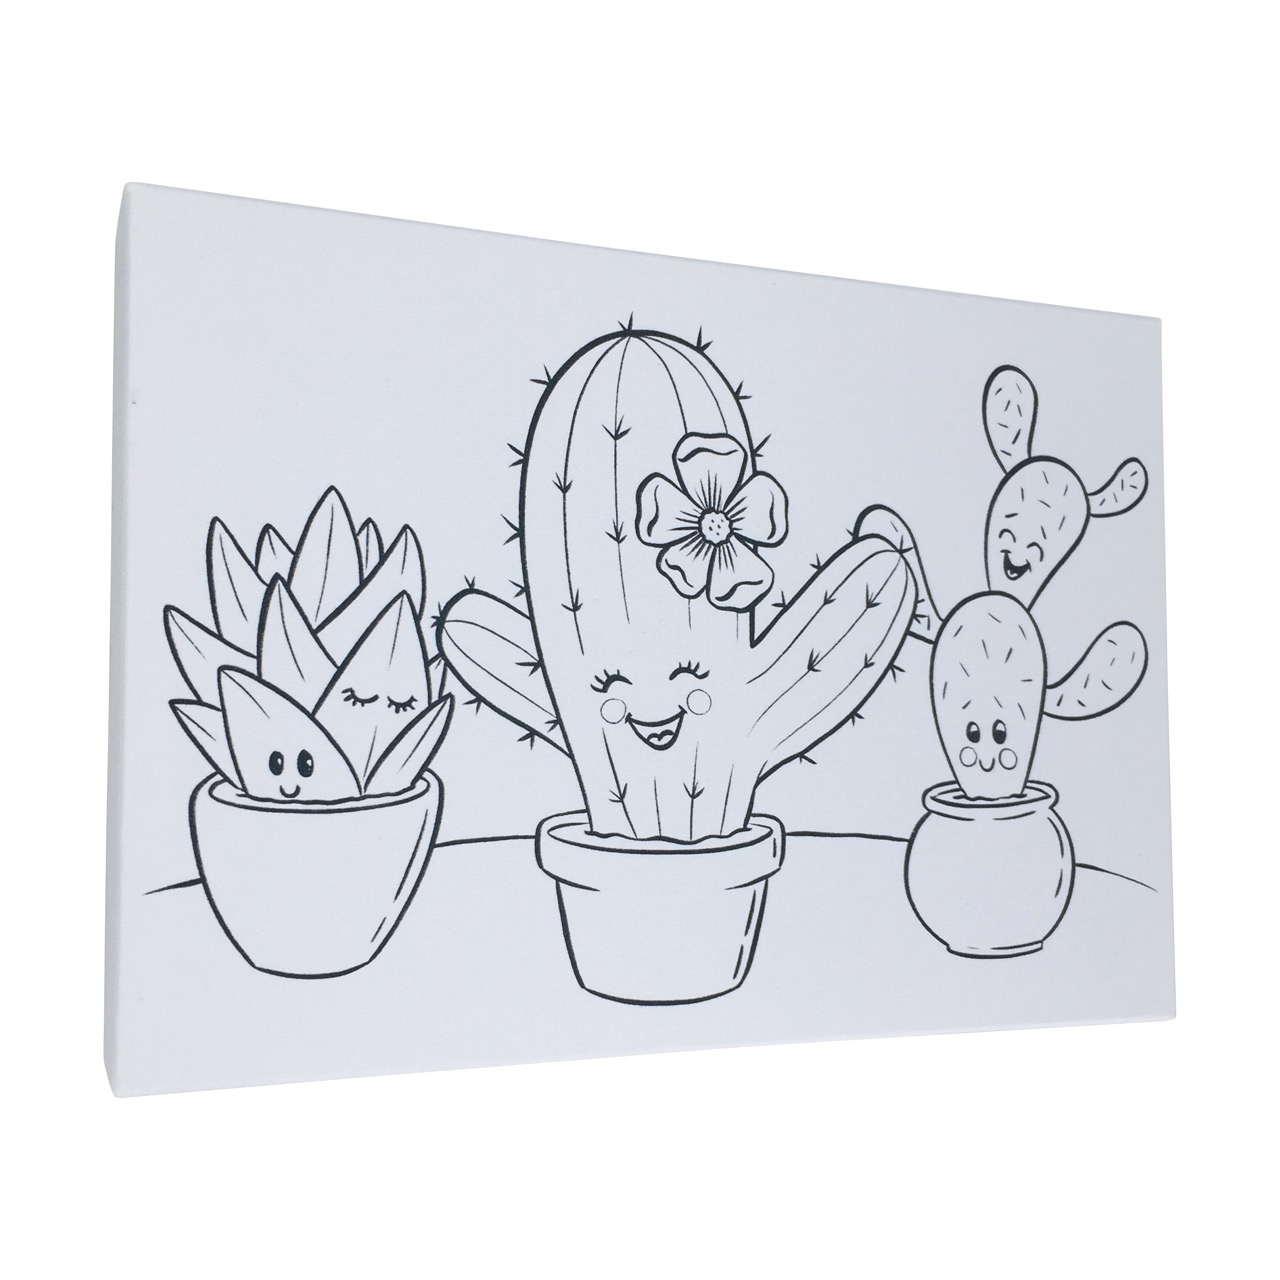 Buntbox Frame M cardboard canvas (21 cm x 14.8 cm) with happy cacti for colouring